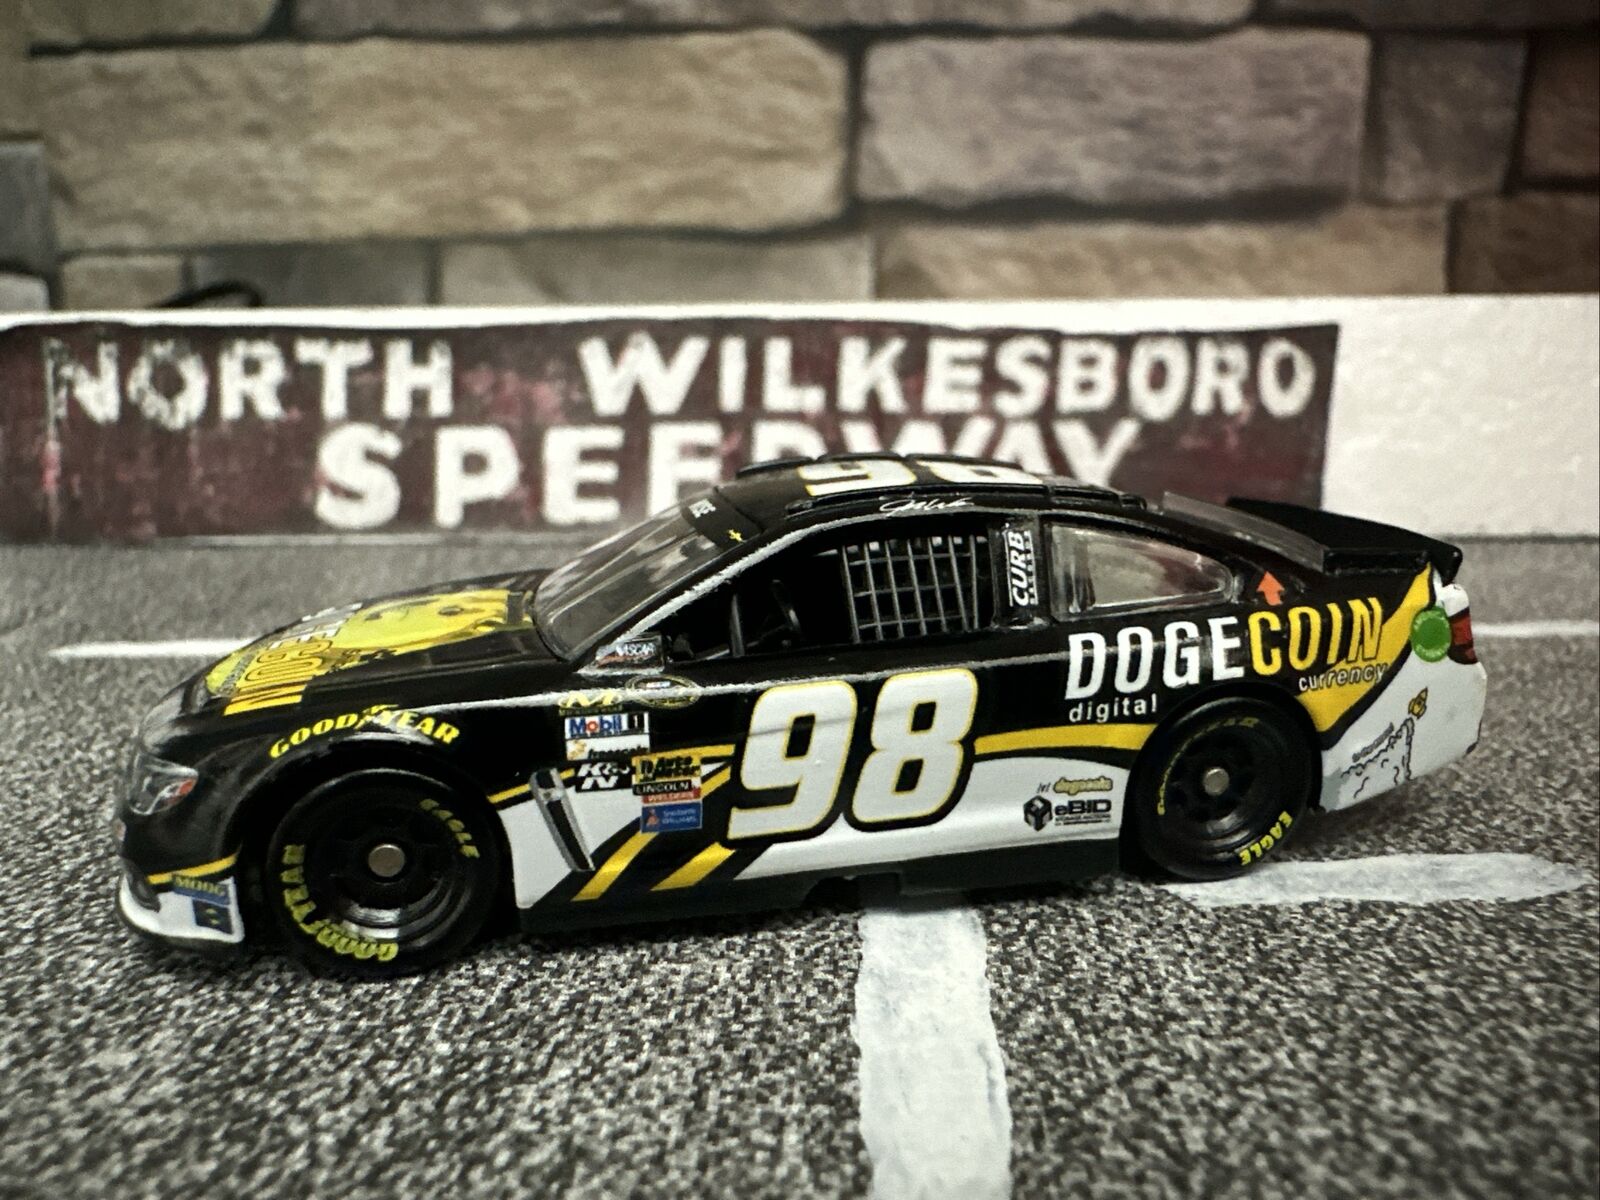 Here Is the Dogecoin Car That Will Race at Talladega This Week